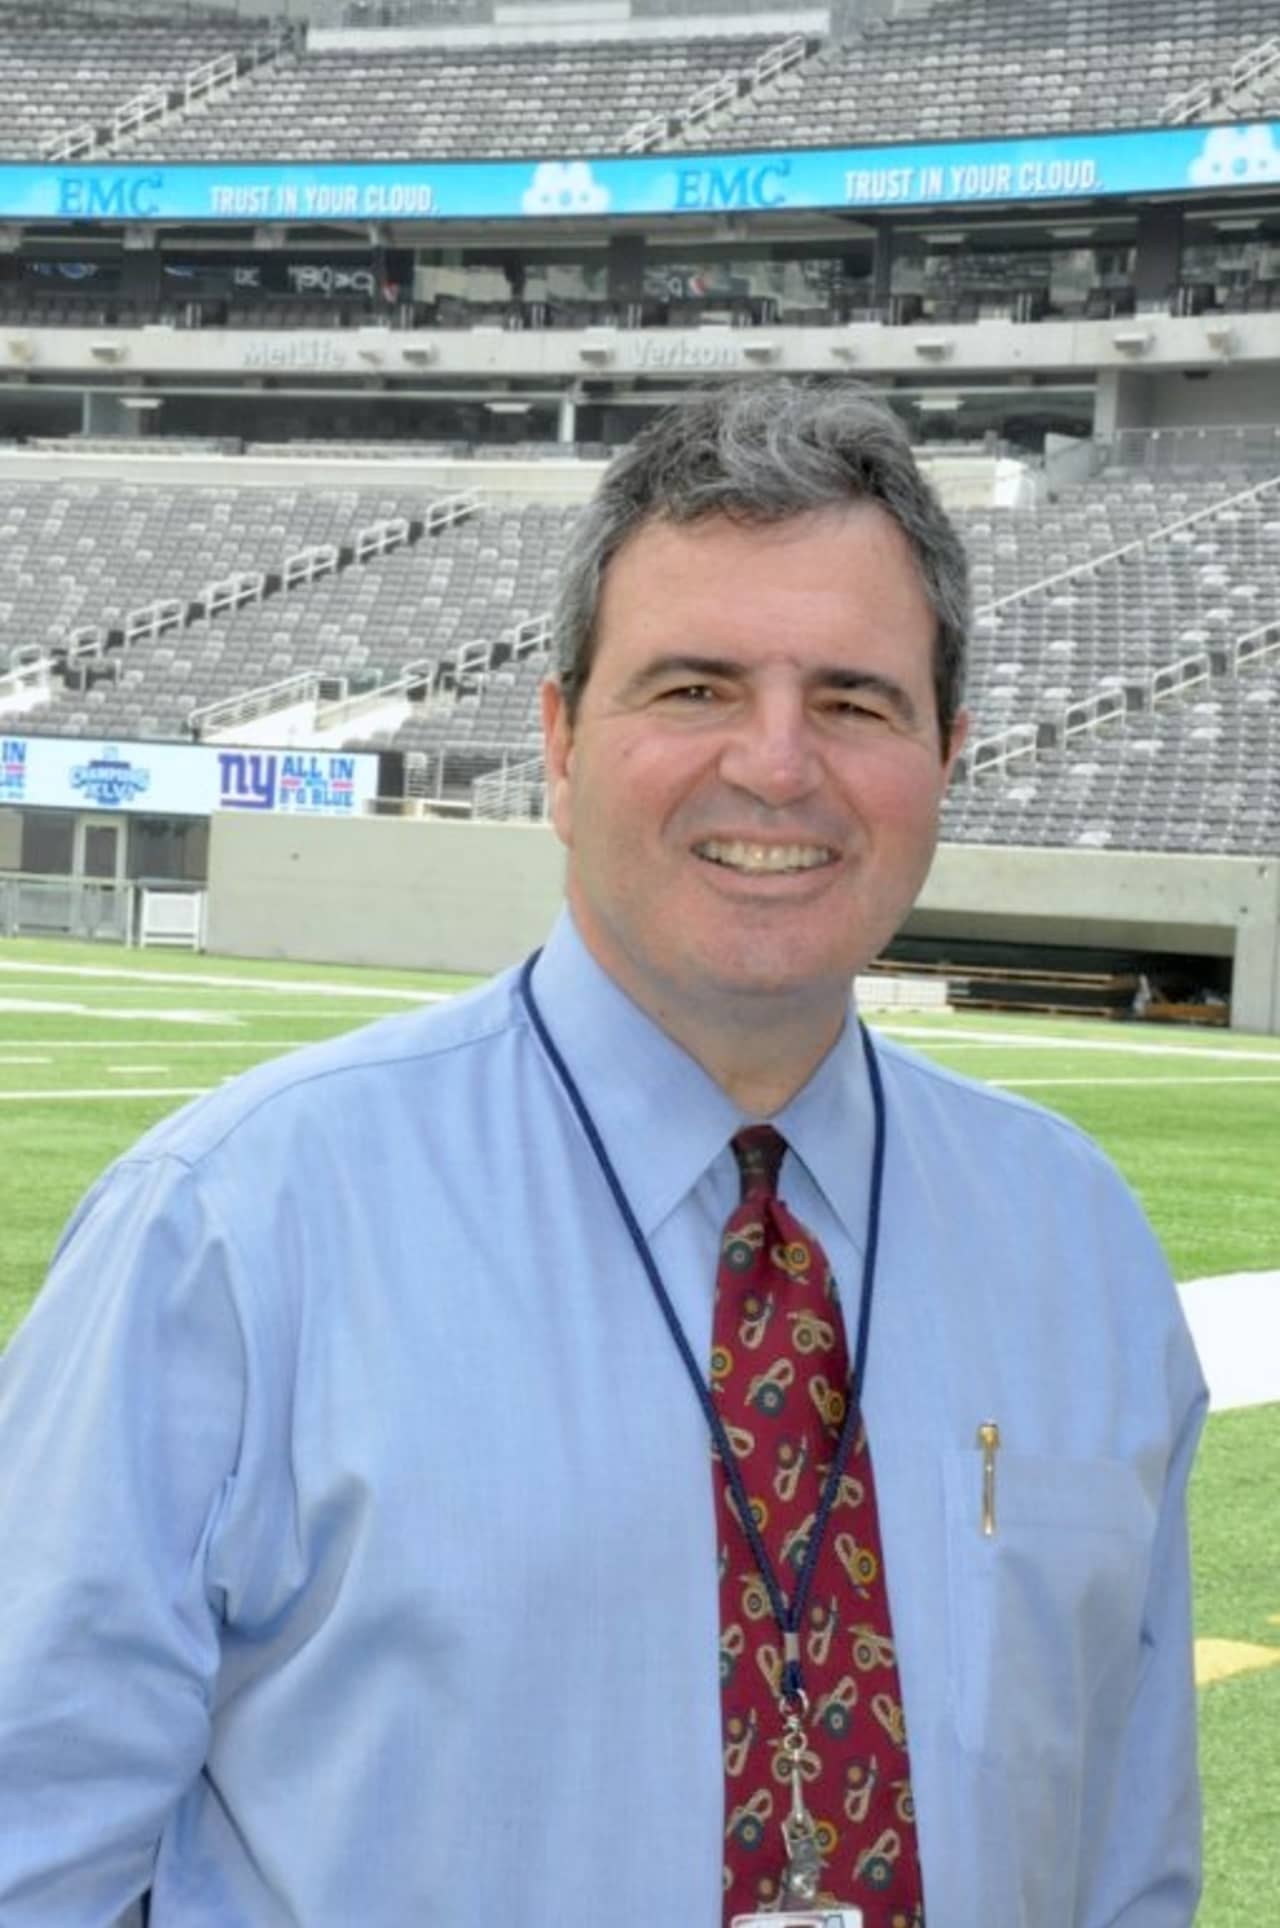 Rich Petriccione will give Bronxville residents the inside scoop on the 2014 NY Metro area Super Bowl on Thursday.